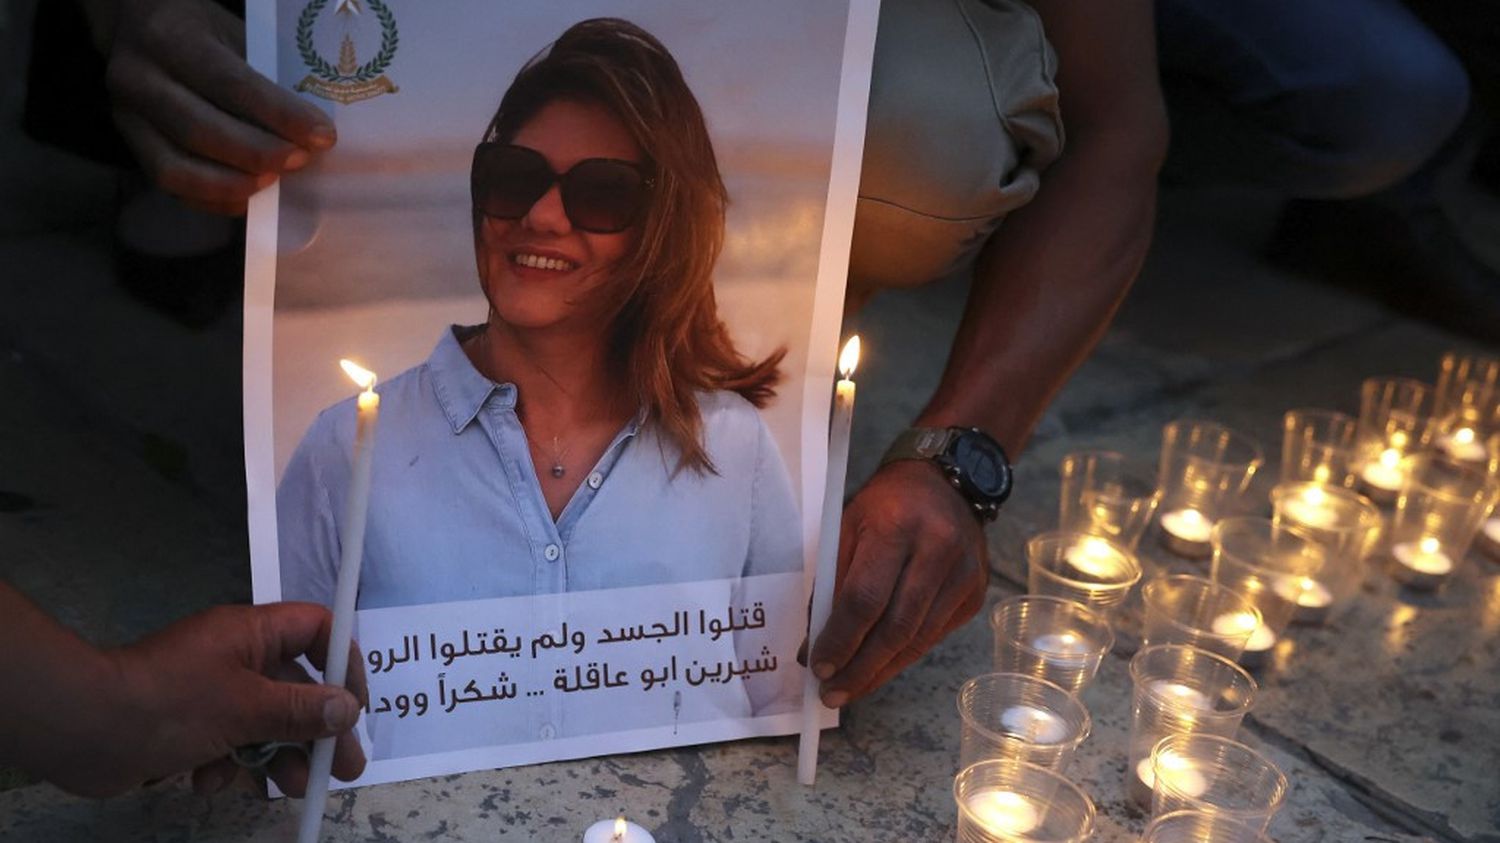 West Bank: UN investigation finds journalist Shireen Abu Akleh killed by Israeli security forces
